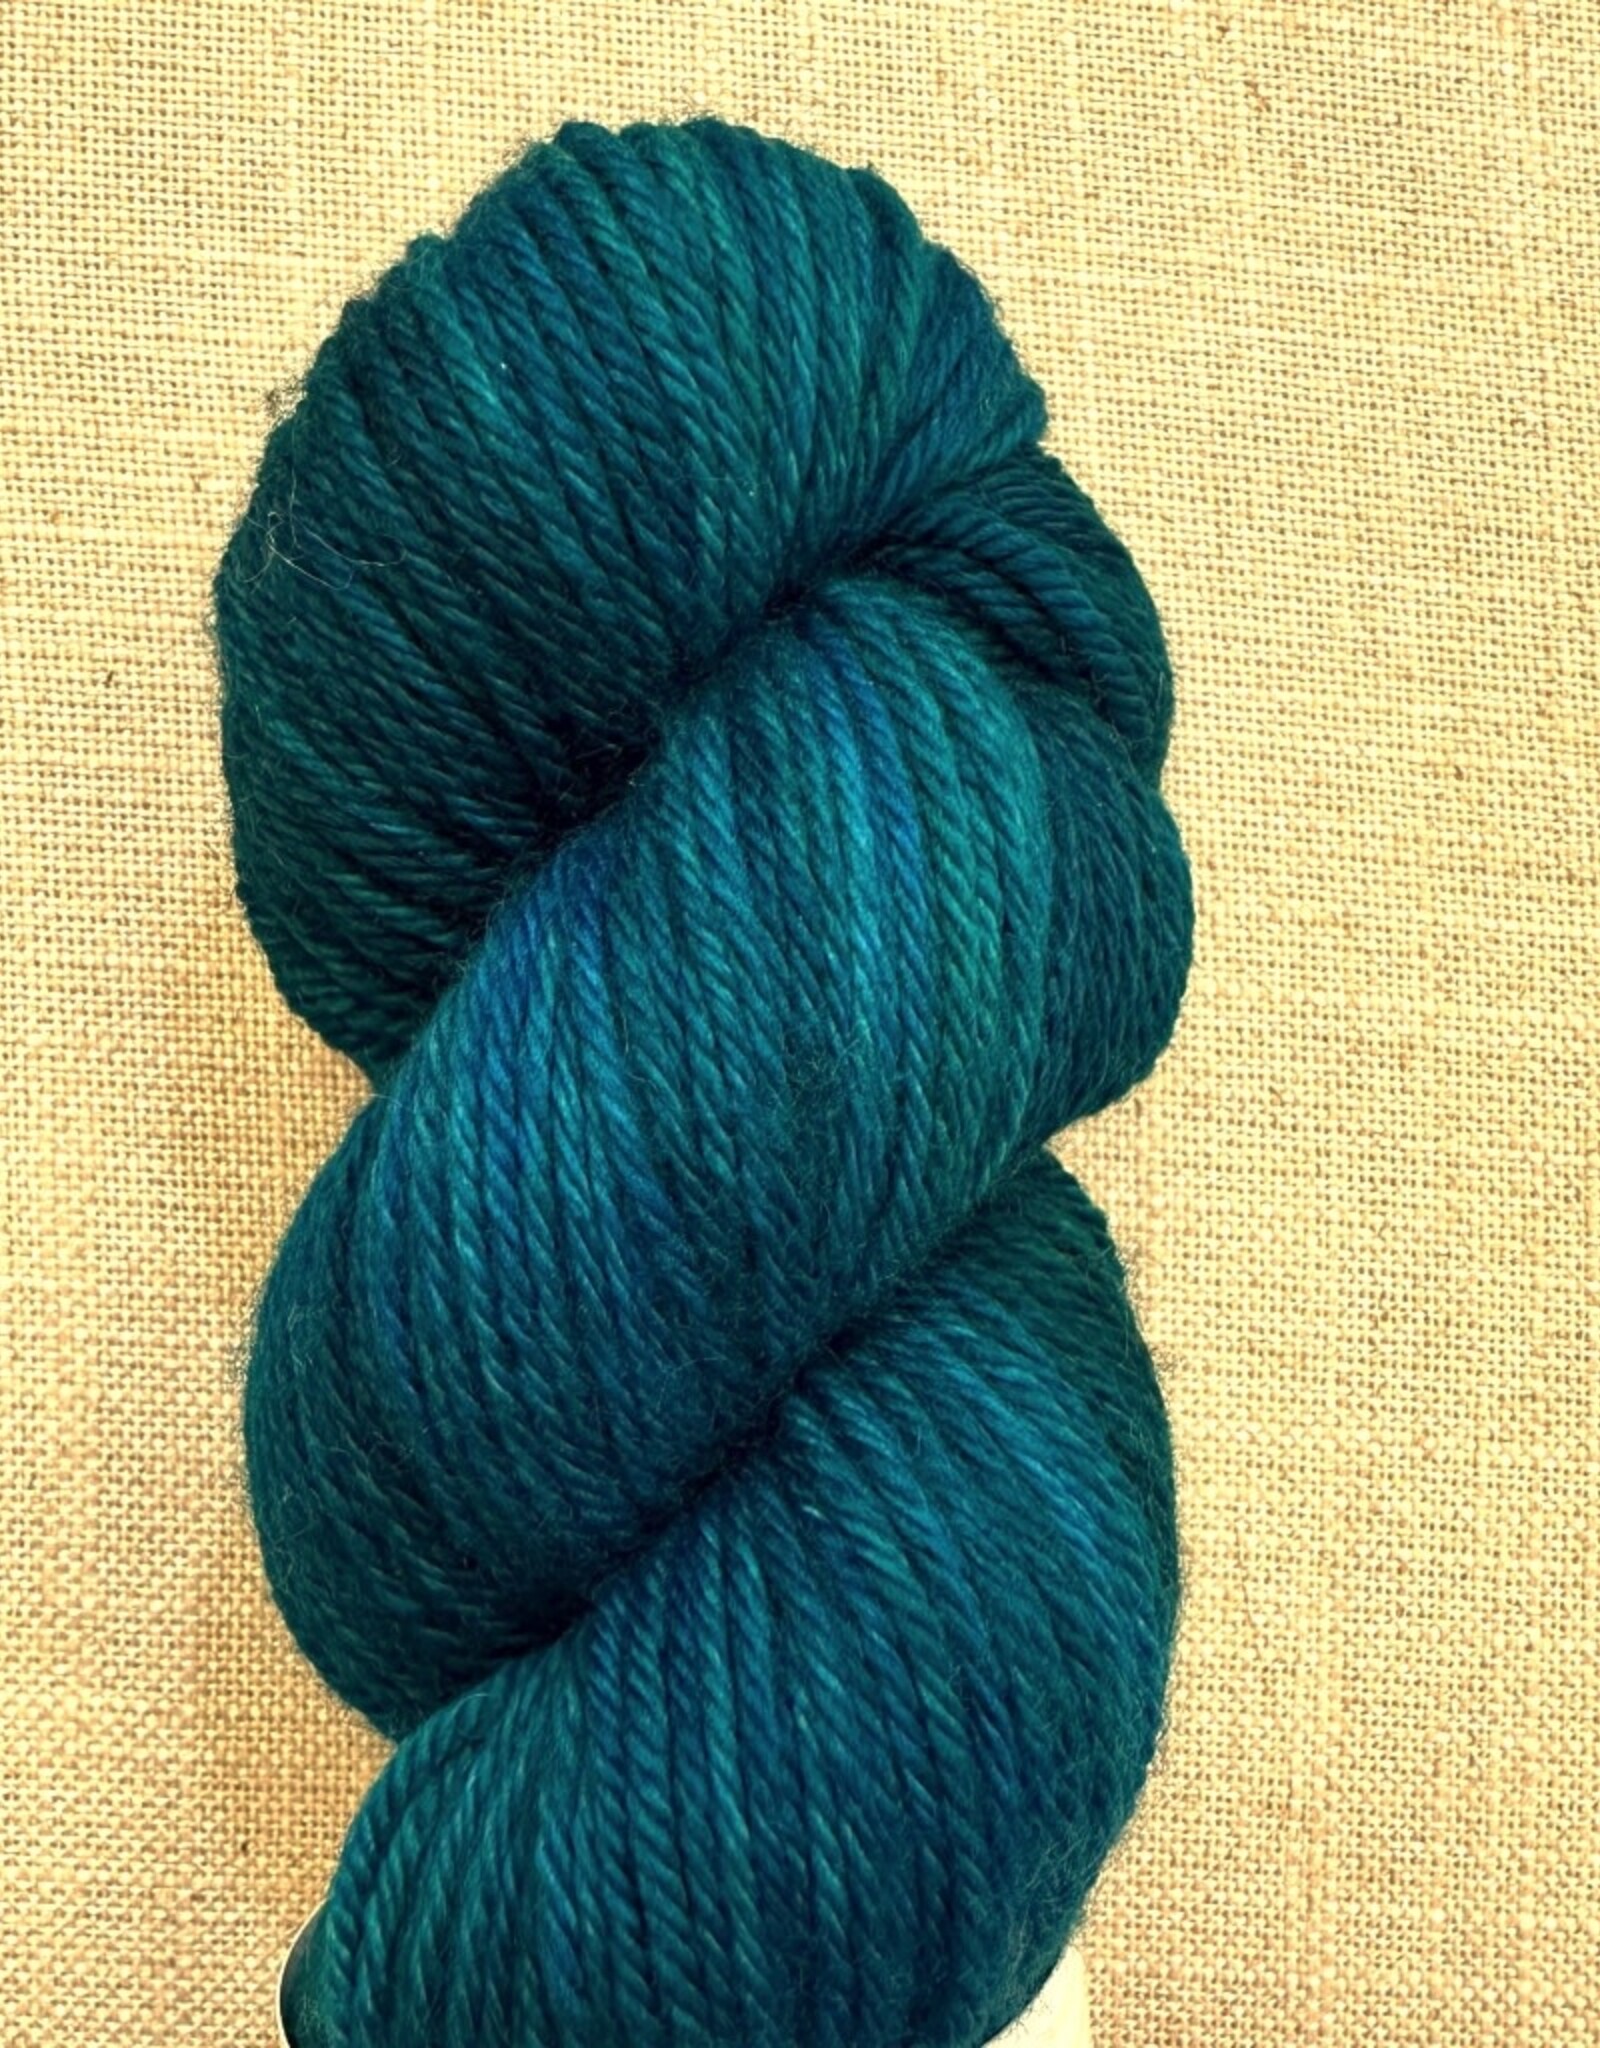 The Sheepyshire Super Squishy Worsted